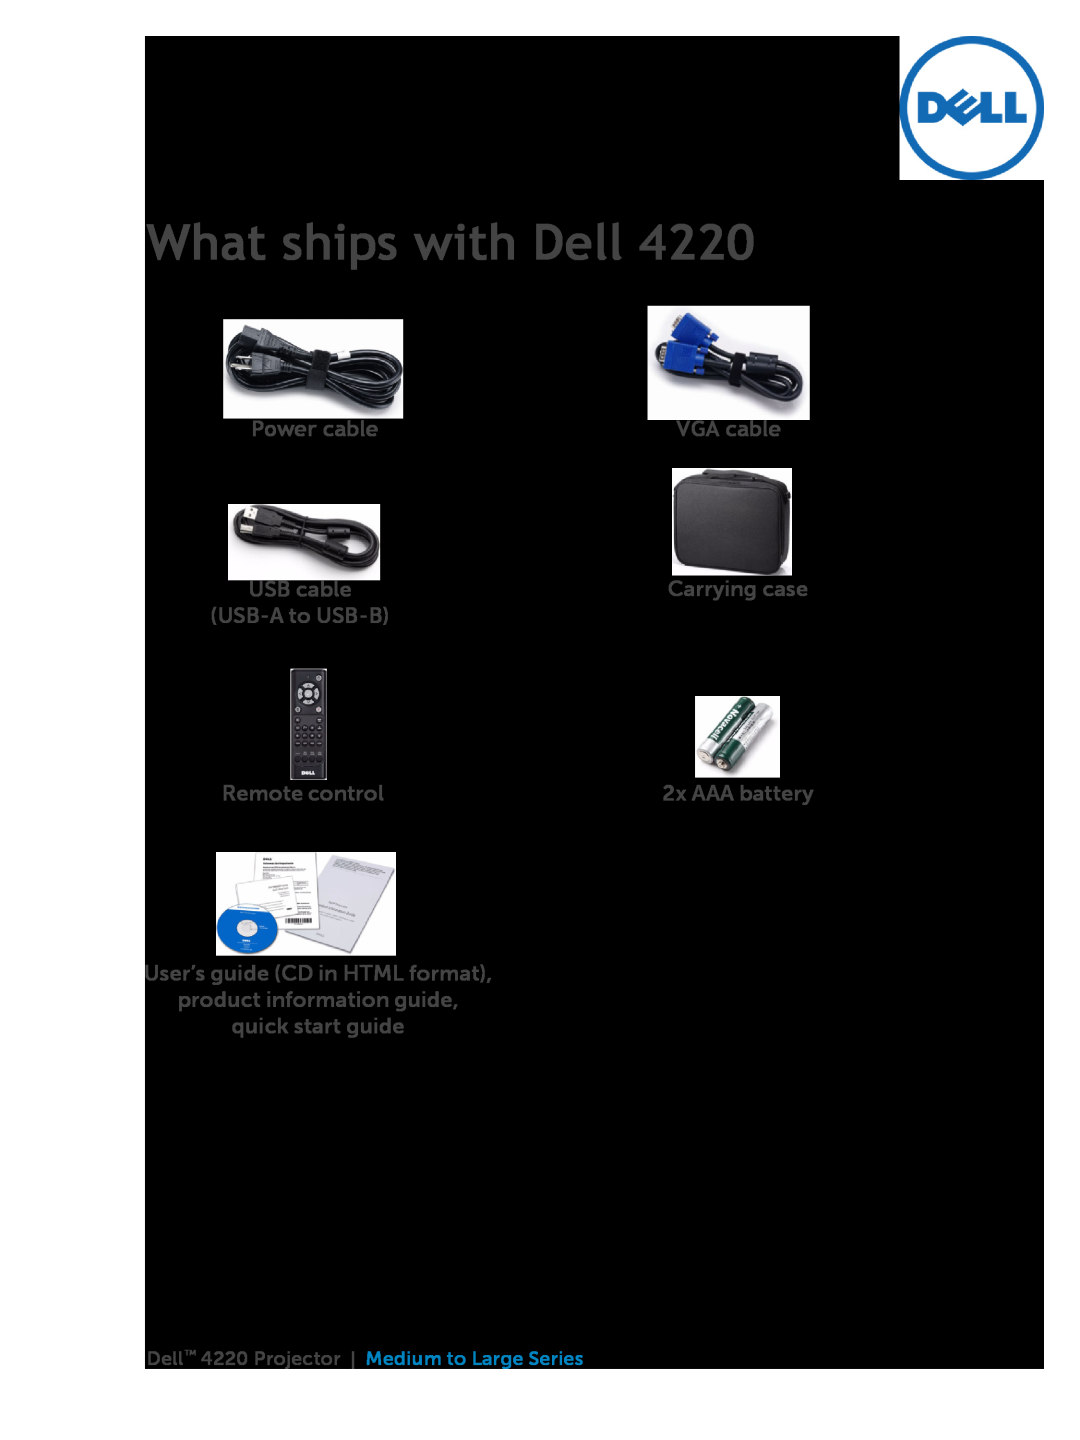 Dell 4220 quick start What ships with Dell, Power cable, Remote control, 2x AAA battery, quick start guide, VGA cable 